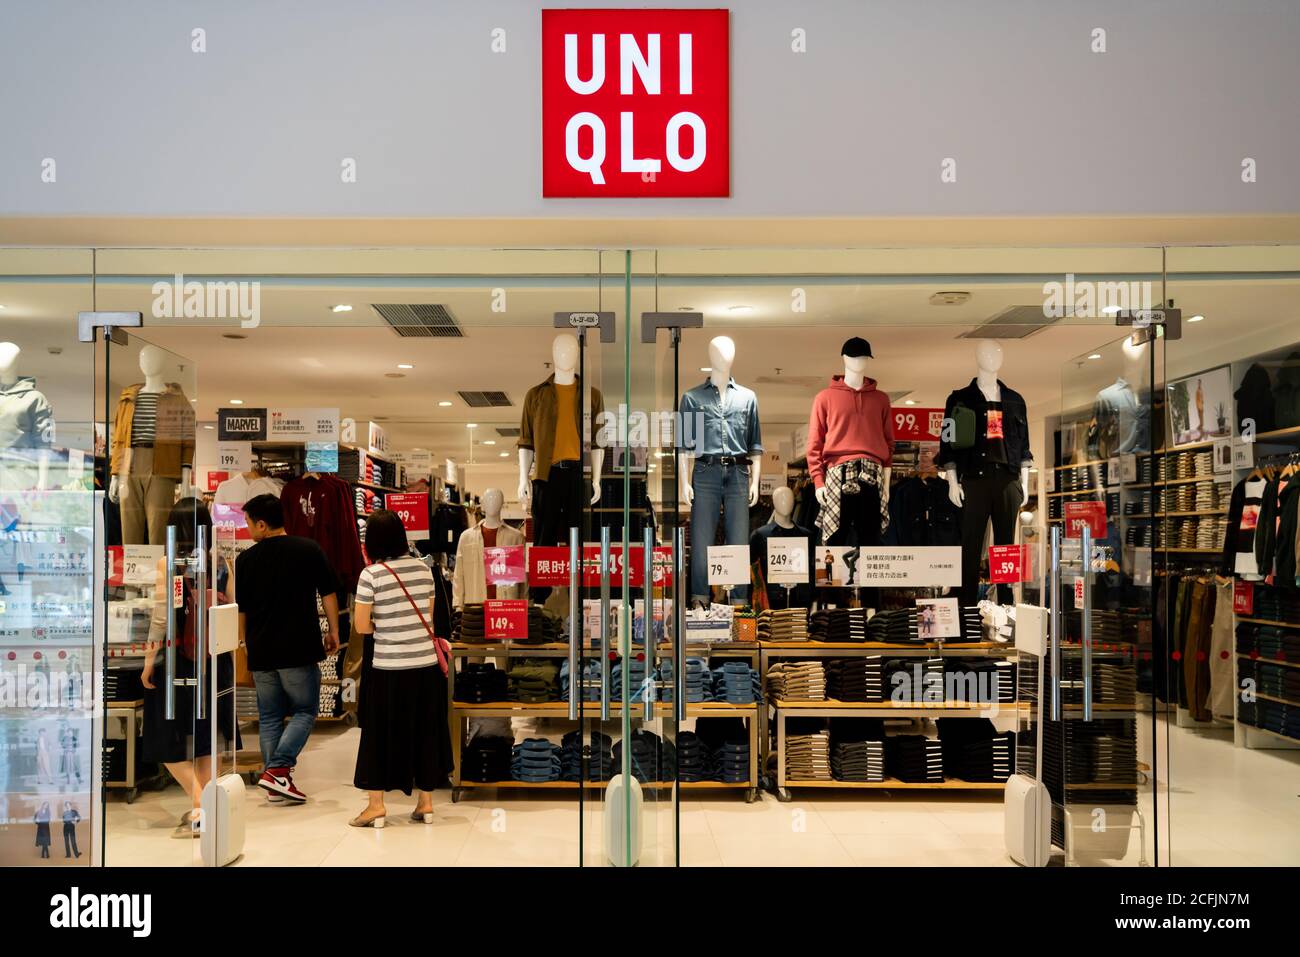 Japanese casual wear designer, manufacturer and retailer, Uniqlo store and  logo seen in Chongqing Stock Photo - Alamy